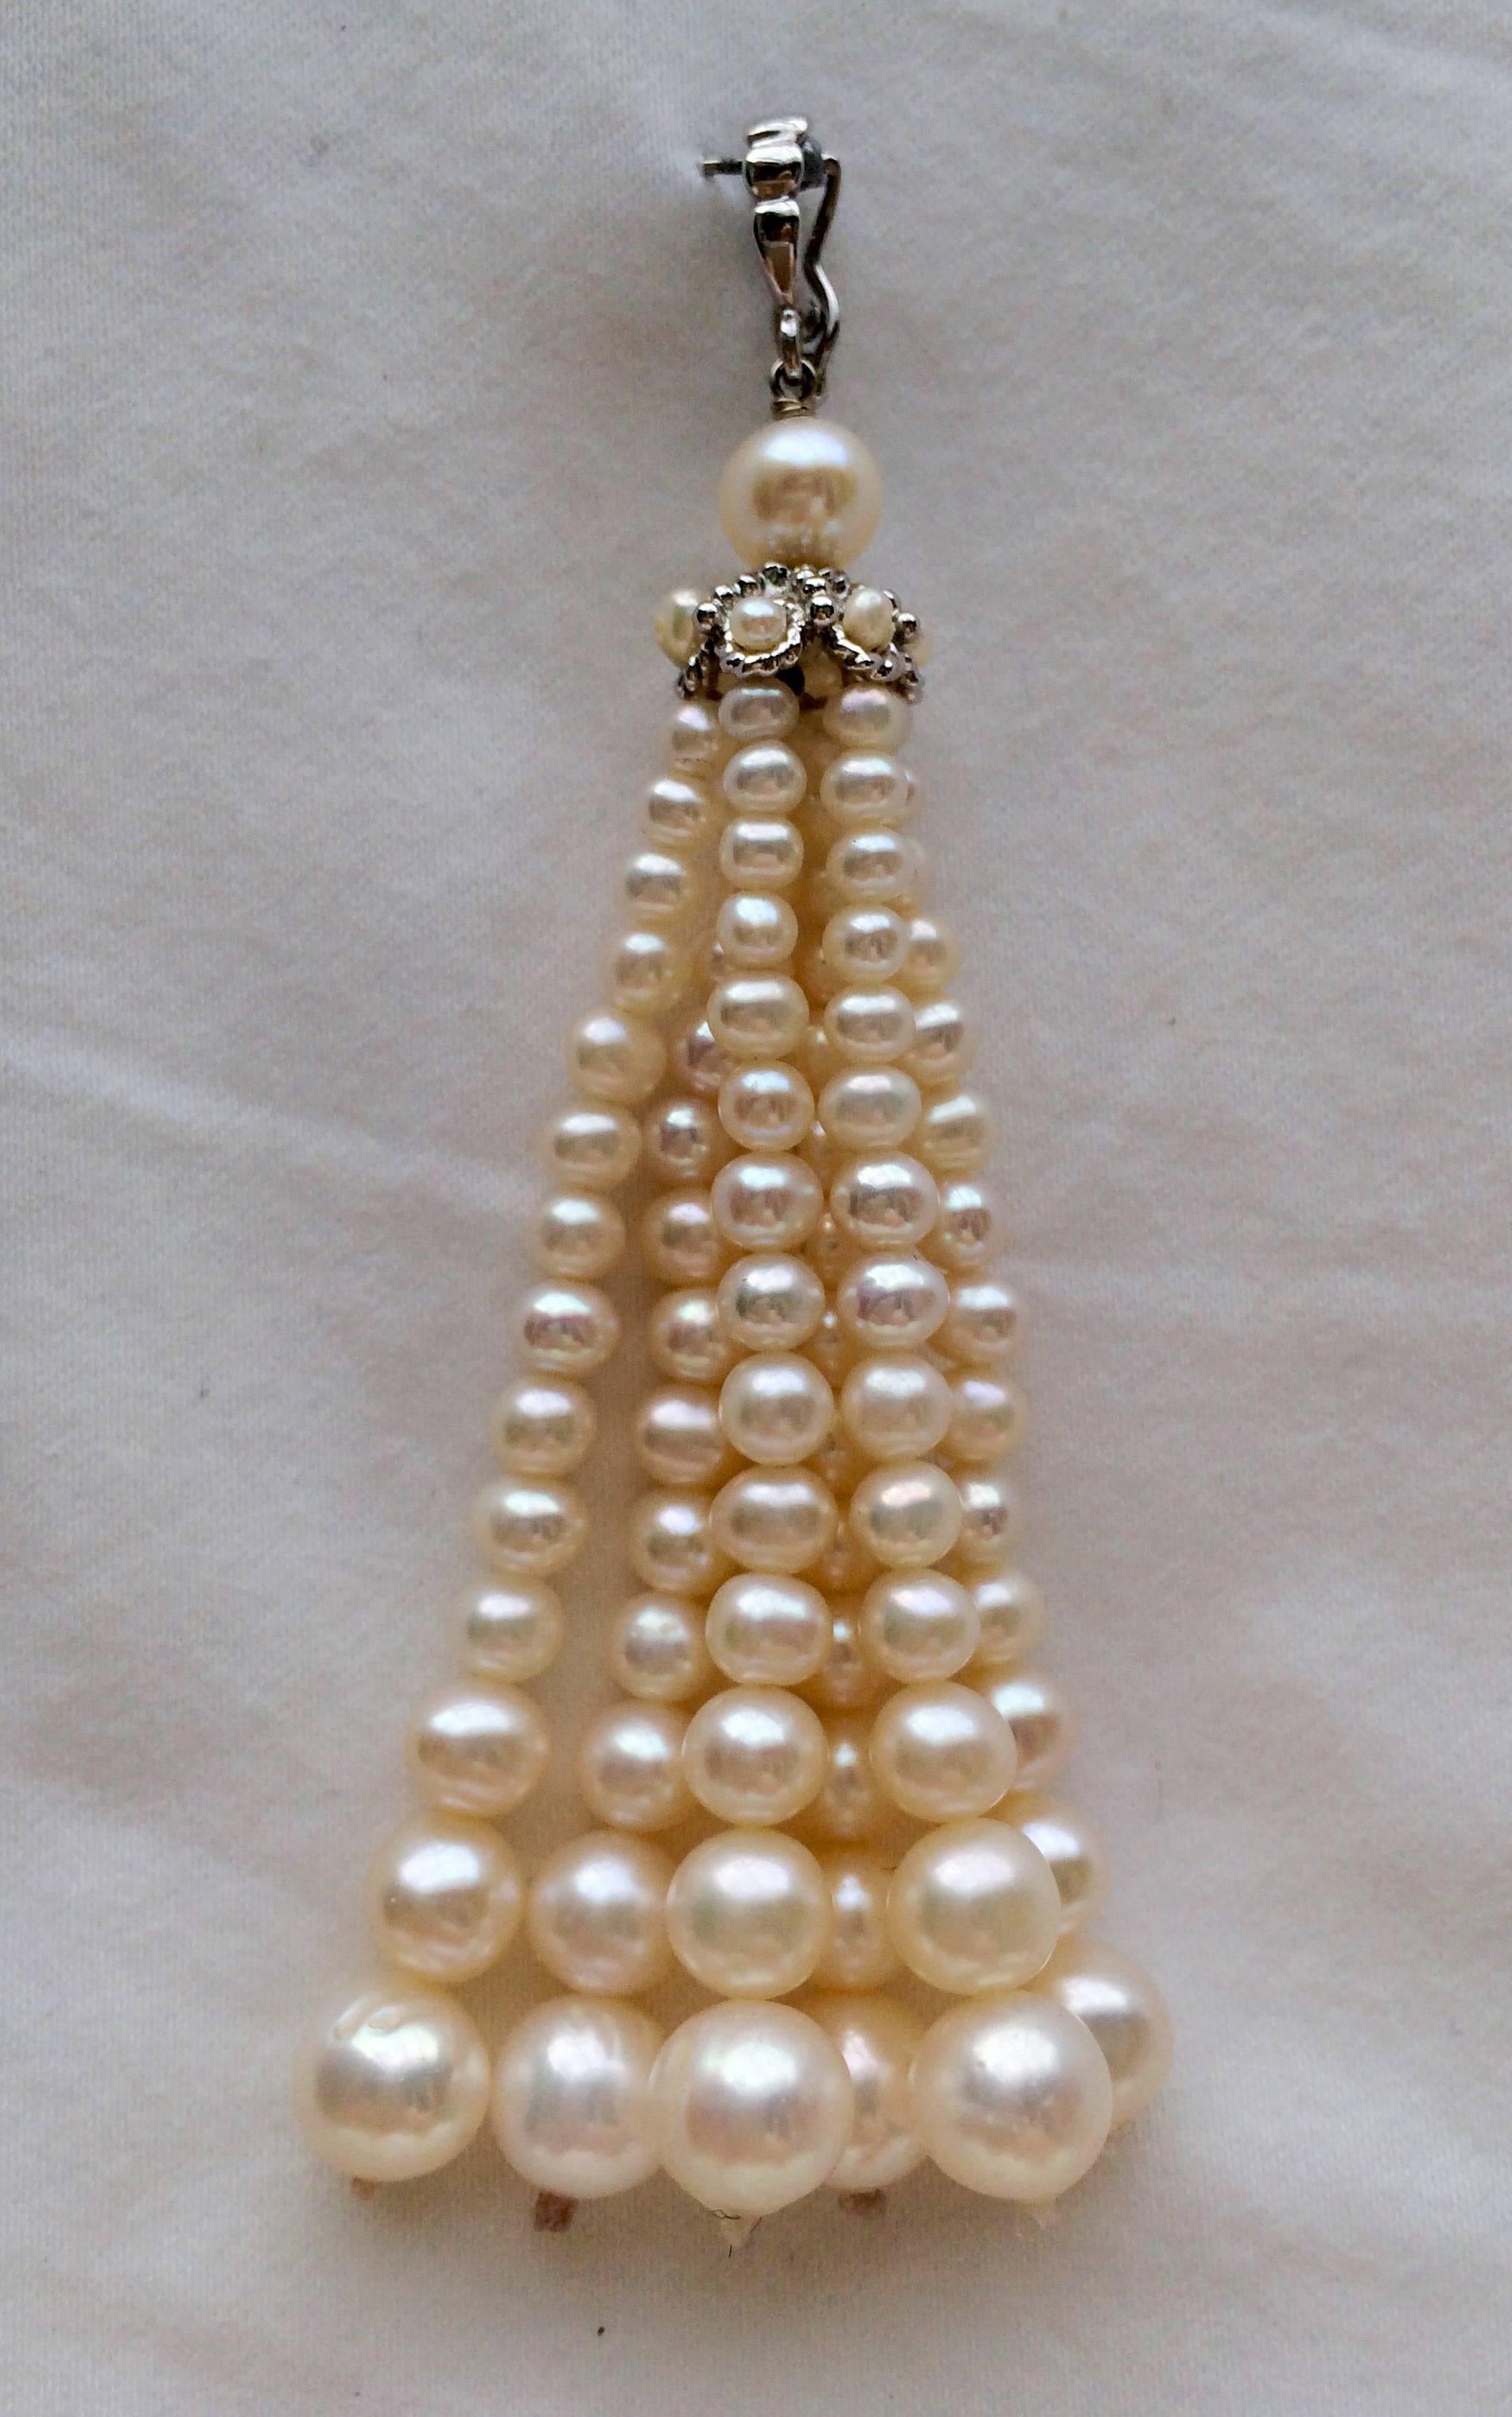  Woven Pearl Art Deco Bracelet with Removable Matching Pearl Tassel by Marina J 1